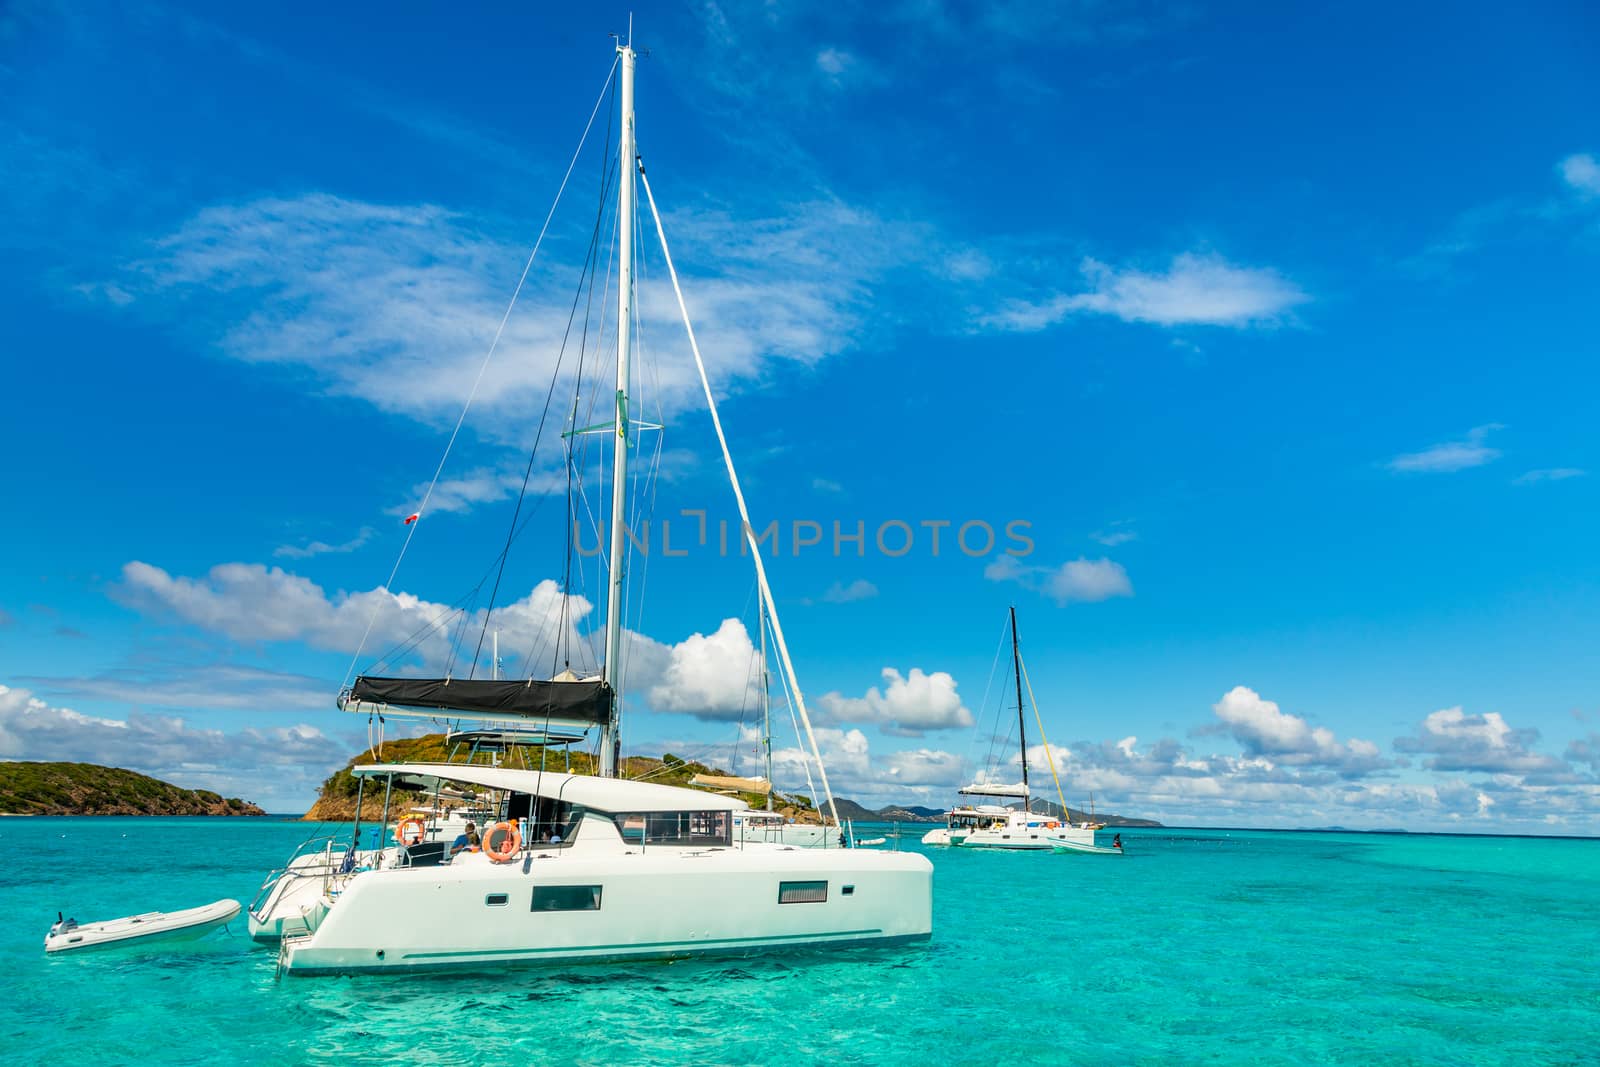 Turquoise colored sea with ancored catamarans, Tobago Cays, Sain by ambeon